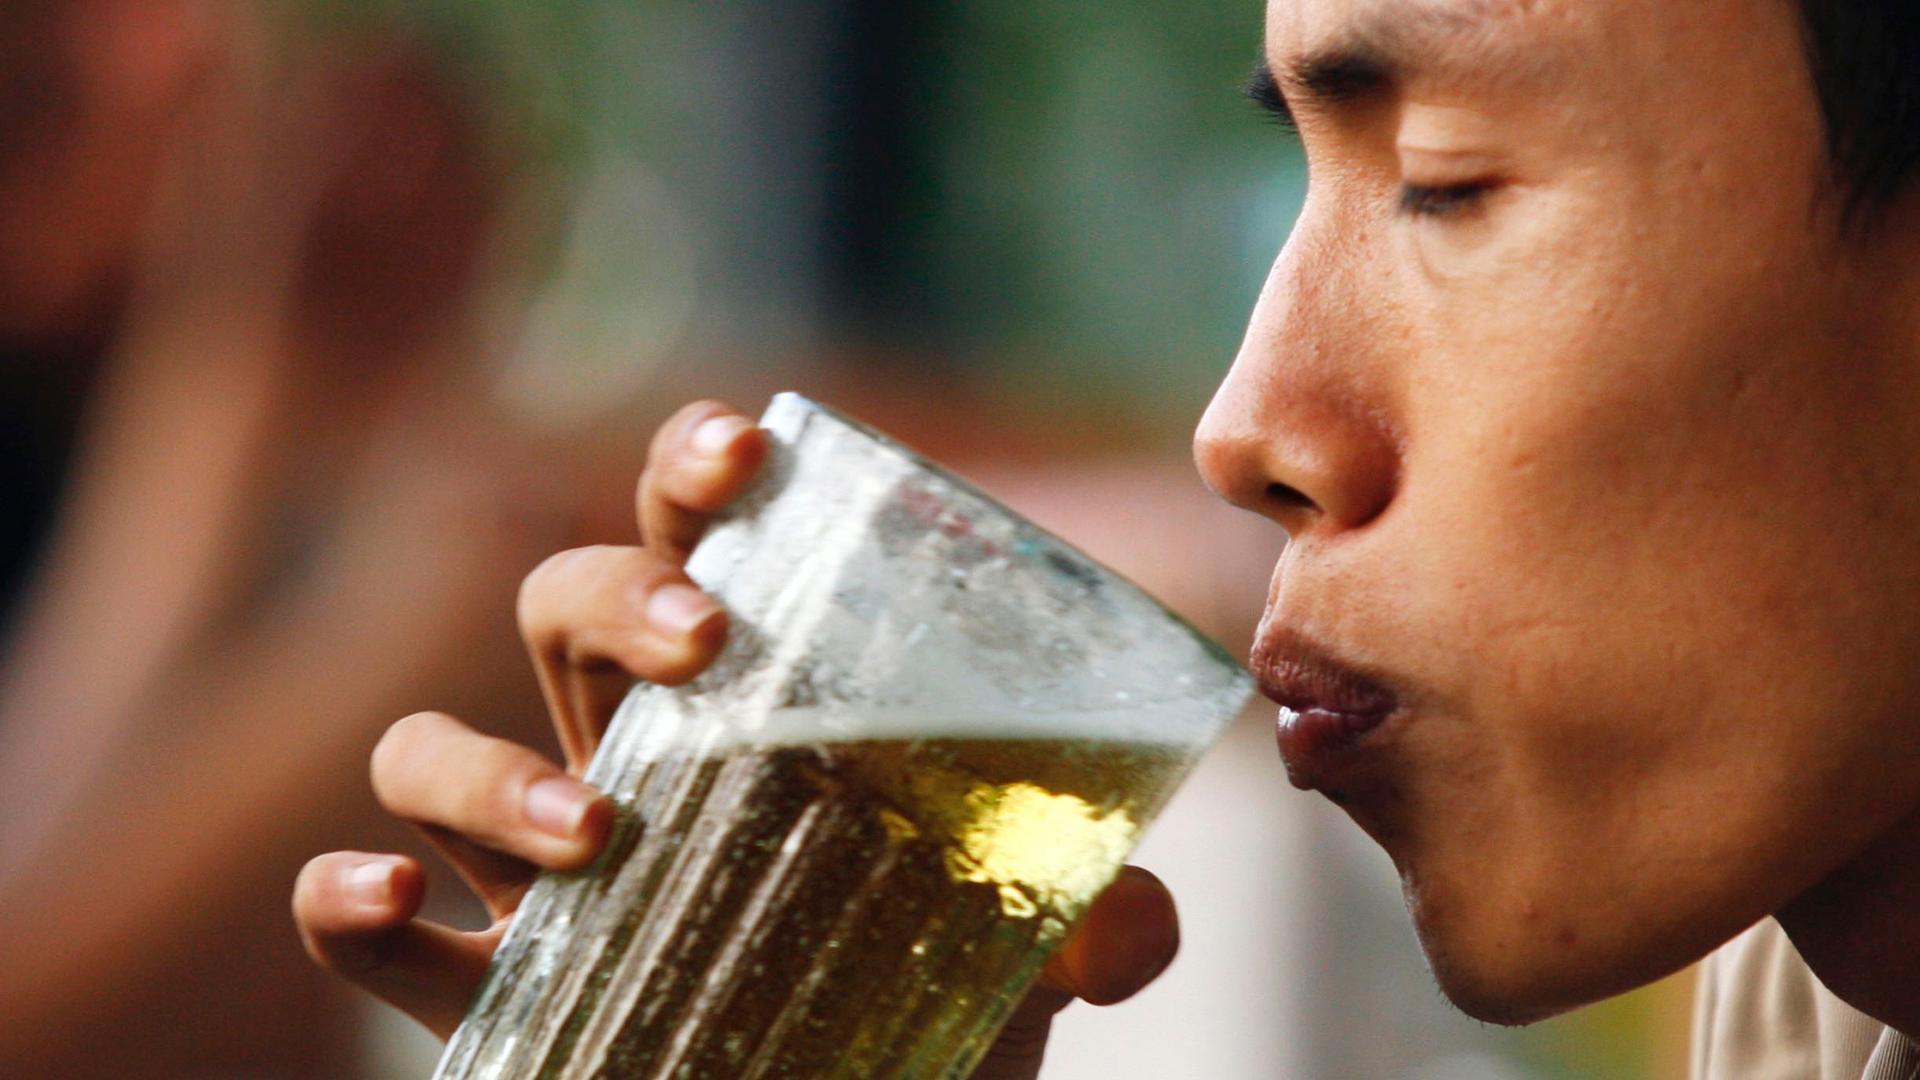 A man drinks beer at a restaurant in Hanoi, July 20, 2009. In smaller markets in Southeast Asia such as Singapore, Thailand and Vietnam, drinking beer is becoming a popular pastime due to rising disposable income and relatively young populations who are e